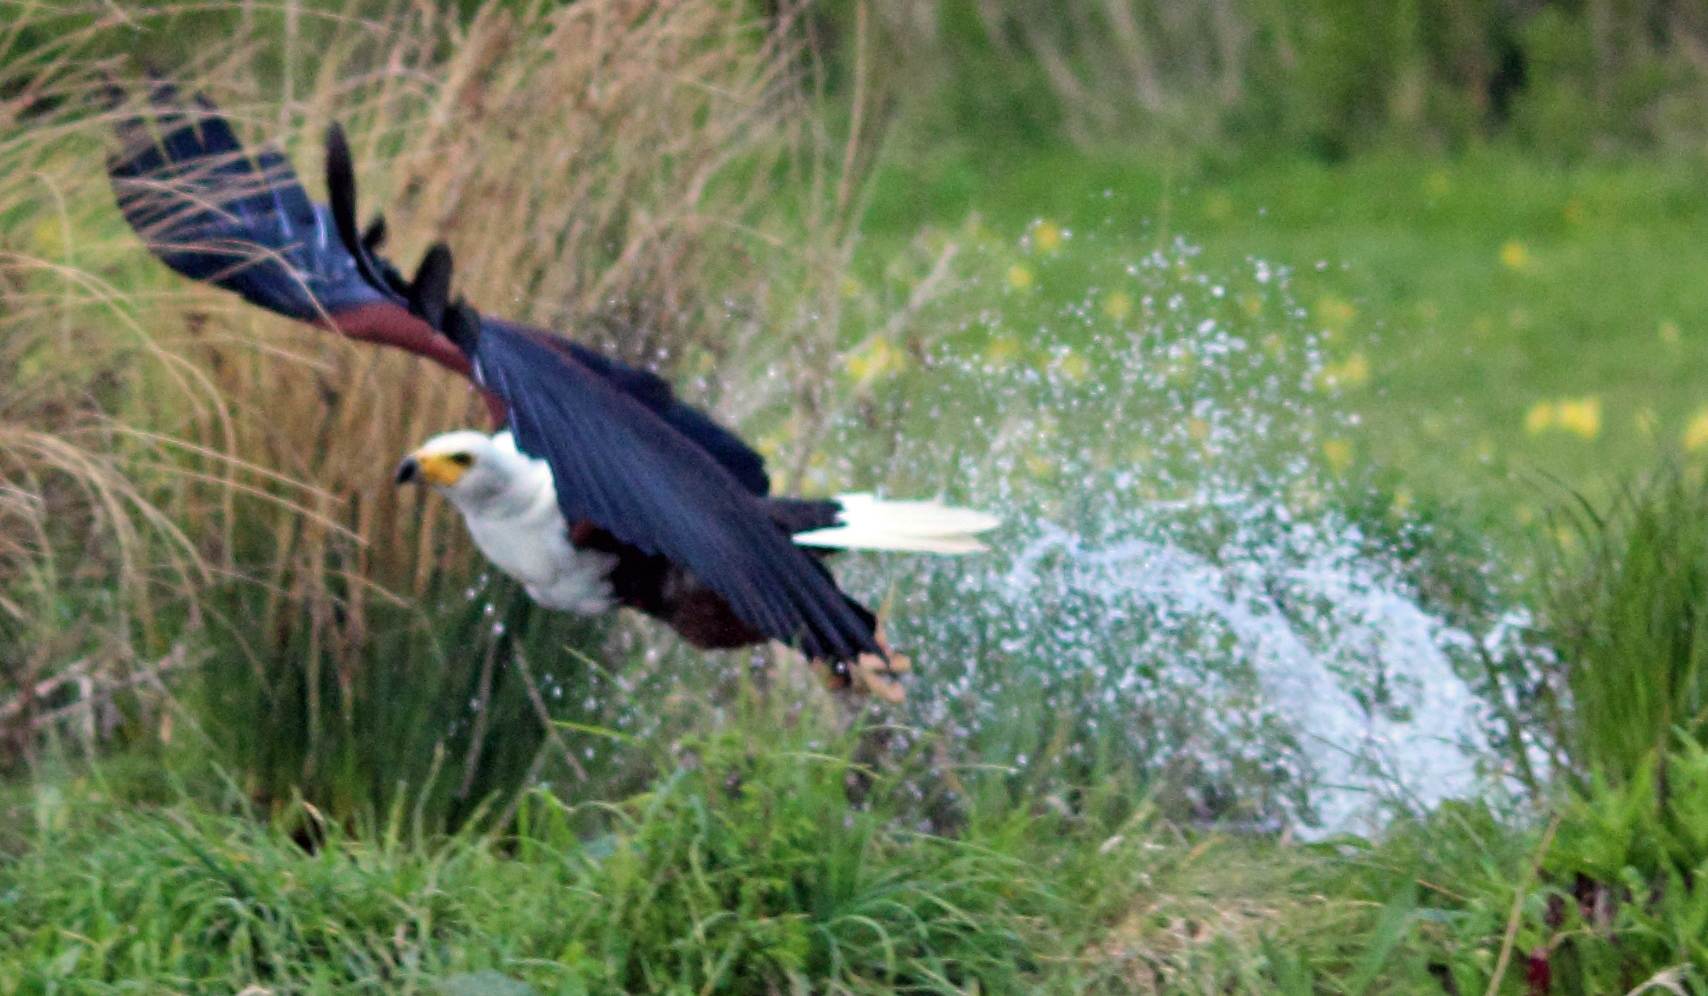 African Fish Eagle 1.jpg  by 10206463230800809